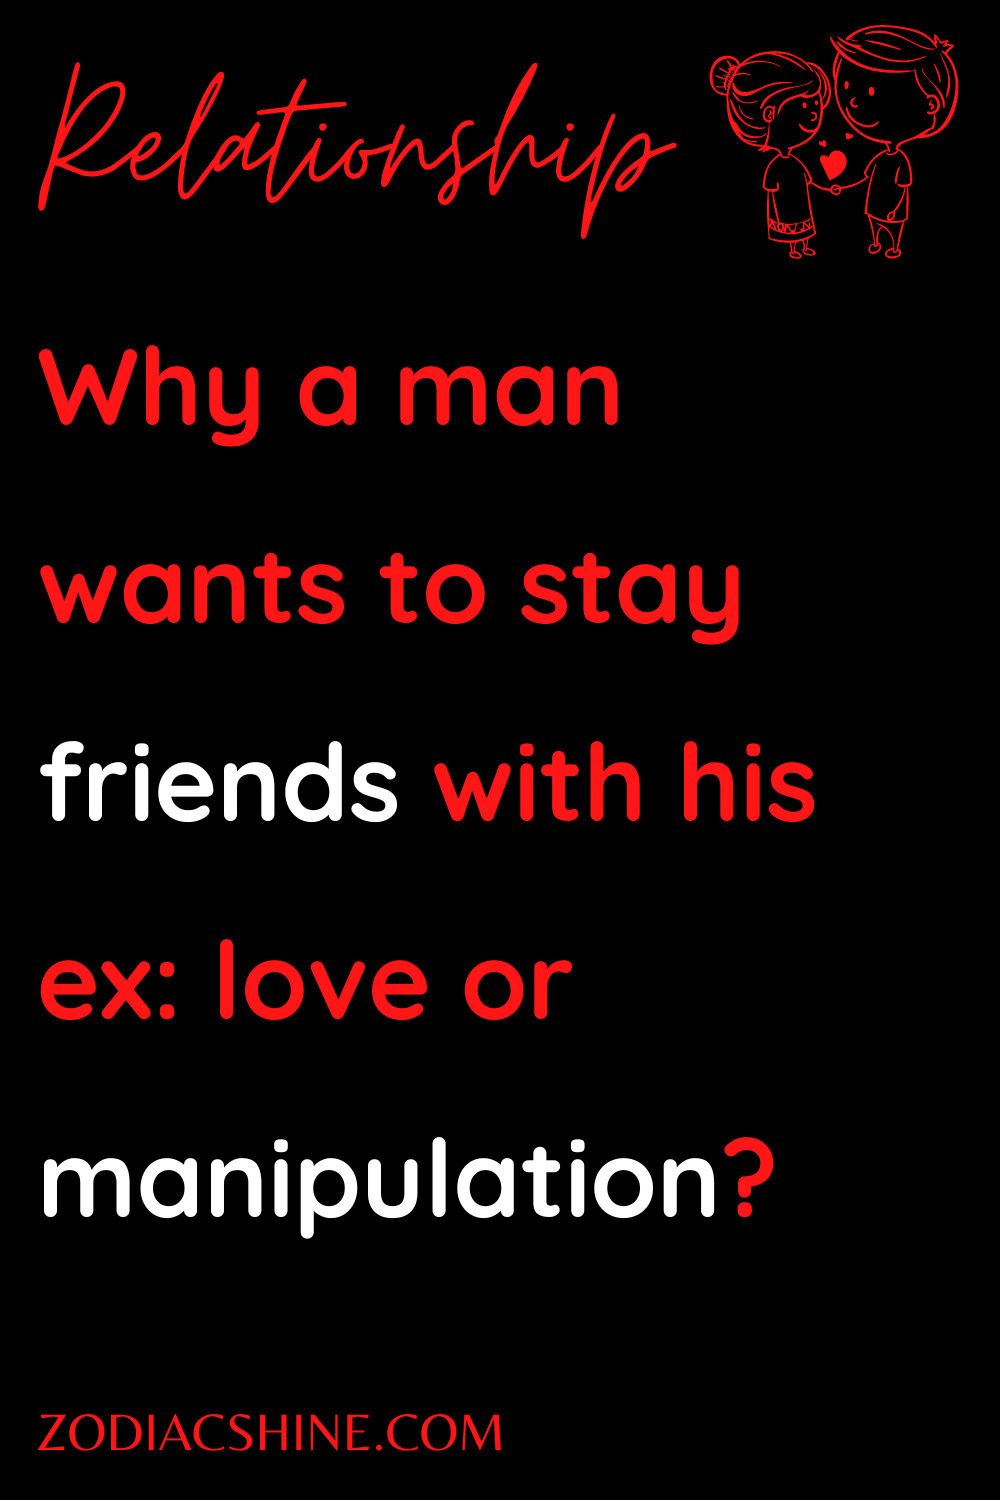 Why a man wants to stay friends with his ex: love or manipulation?